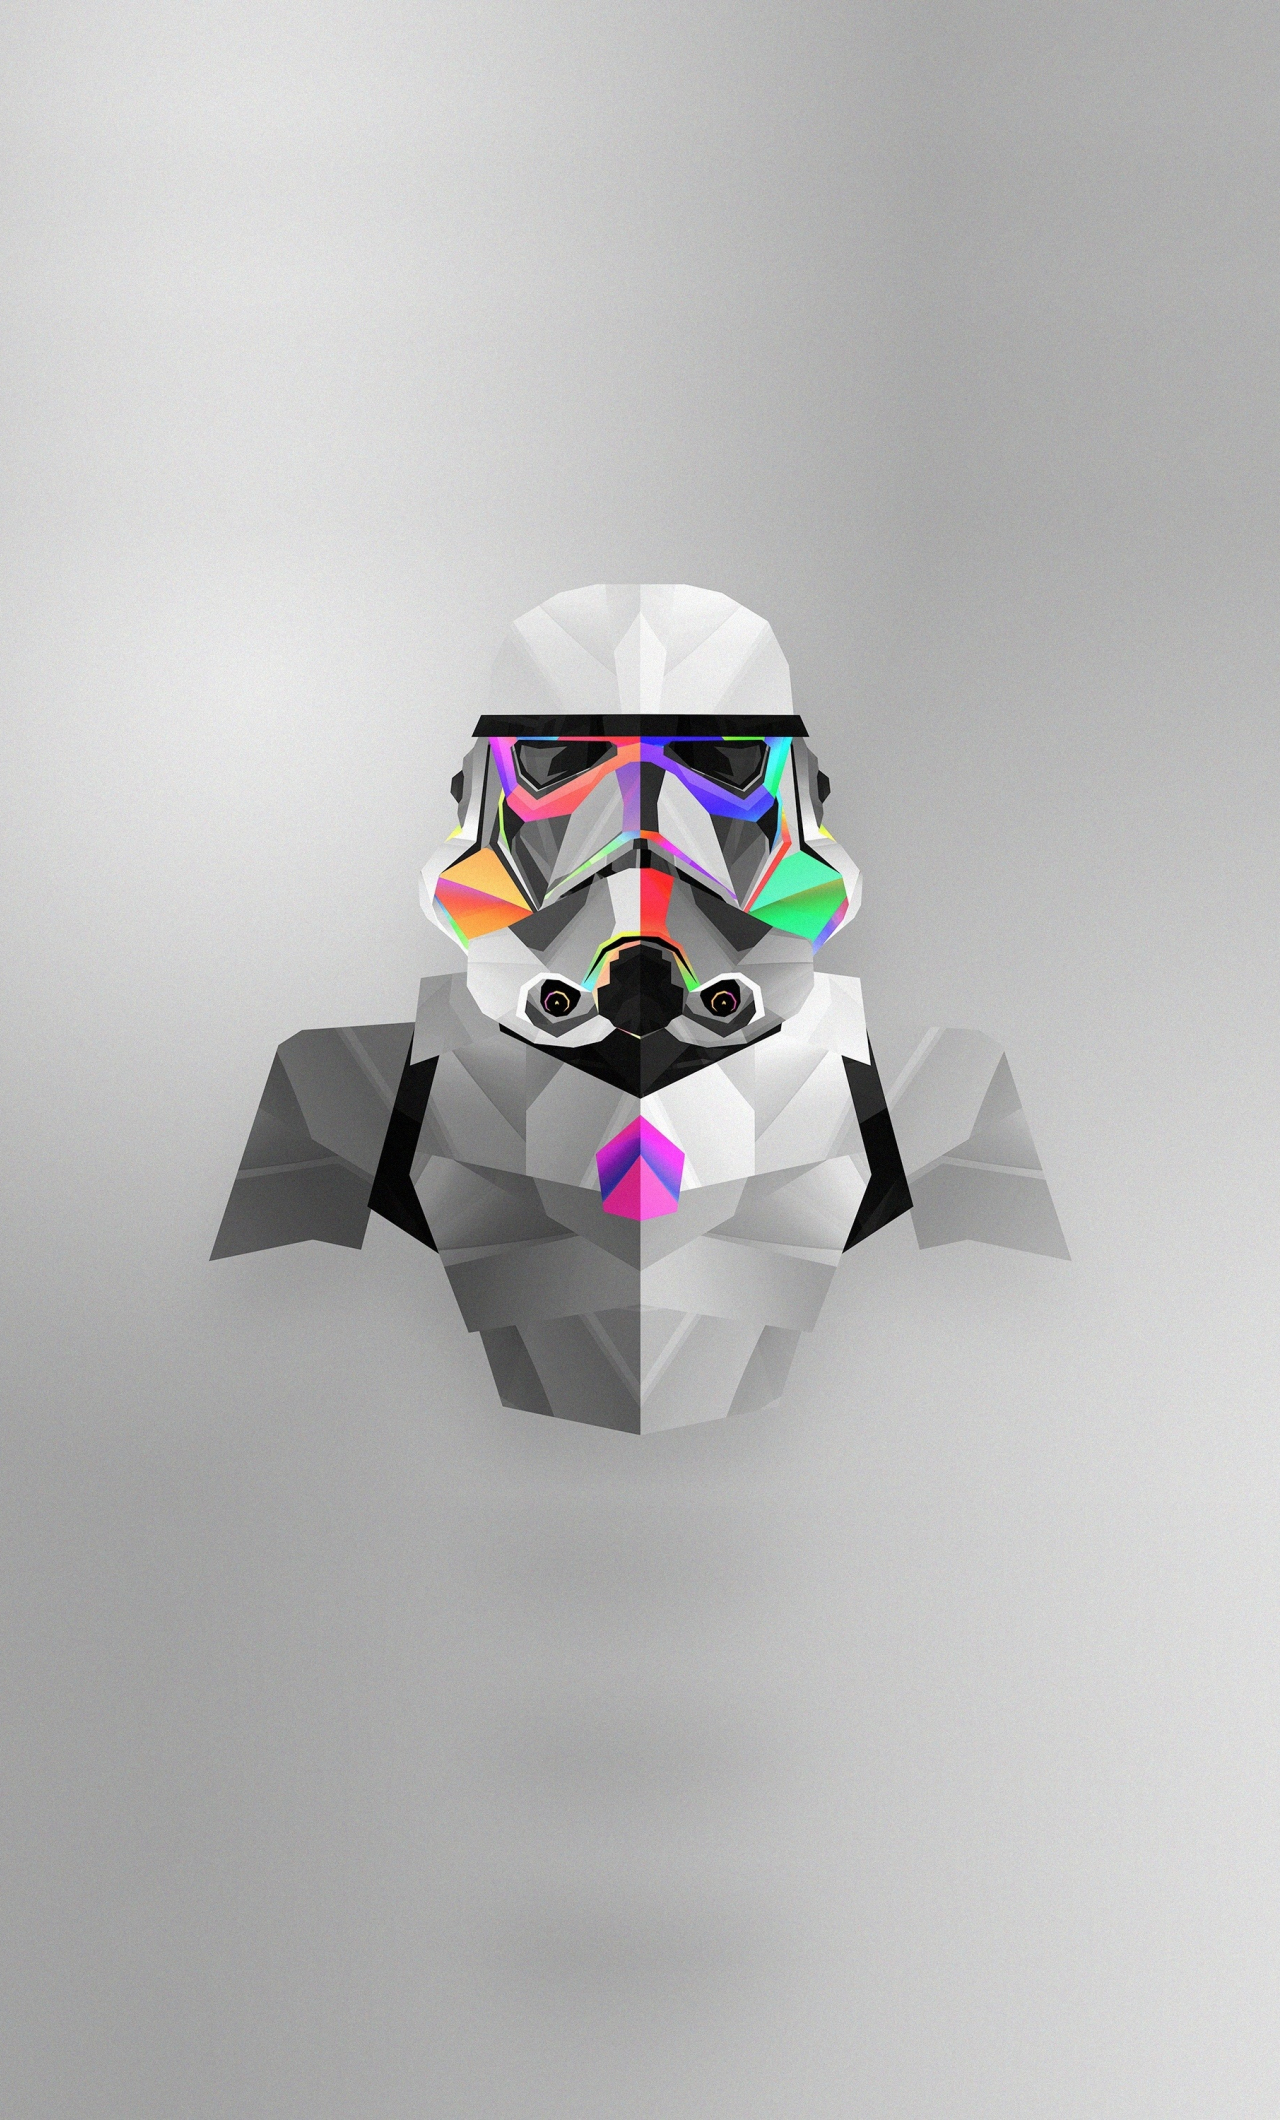 Download stormtrooper, abstract, star wars, colorful, minimal, art 1280x2120 wallpaper, iphone 6 plus, 1280x2120 HD image, background, 16984